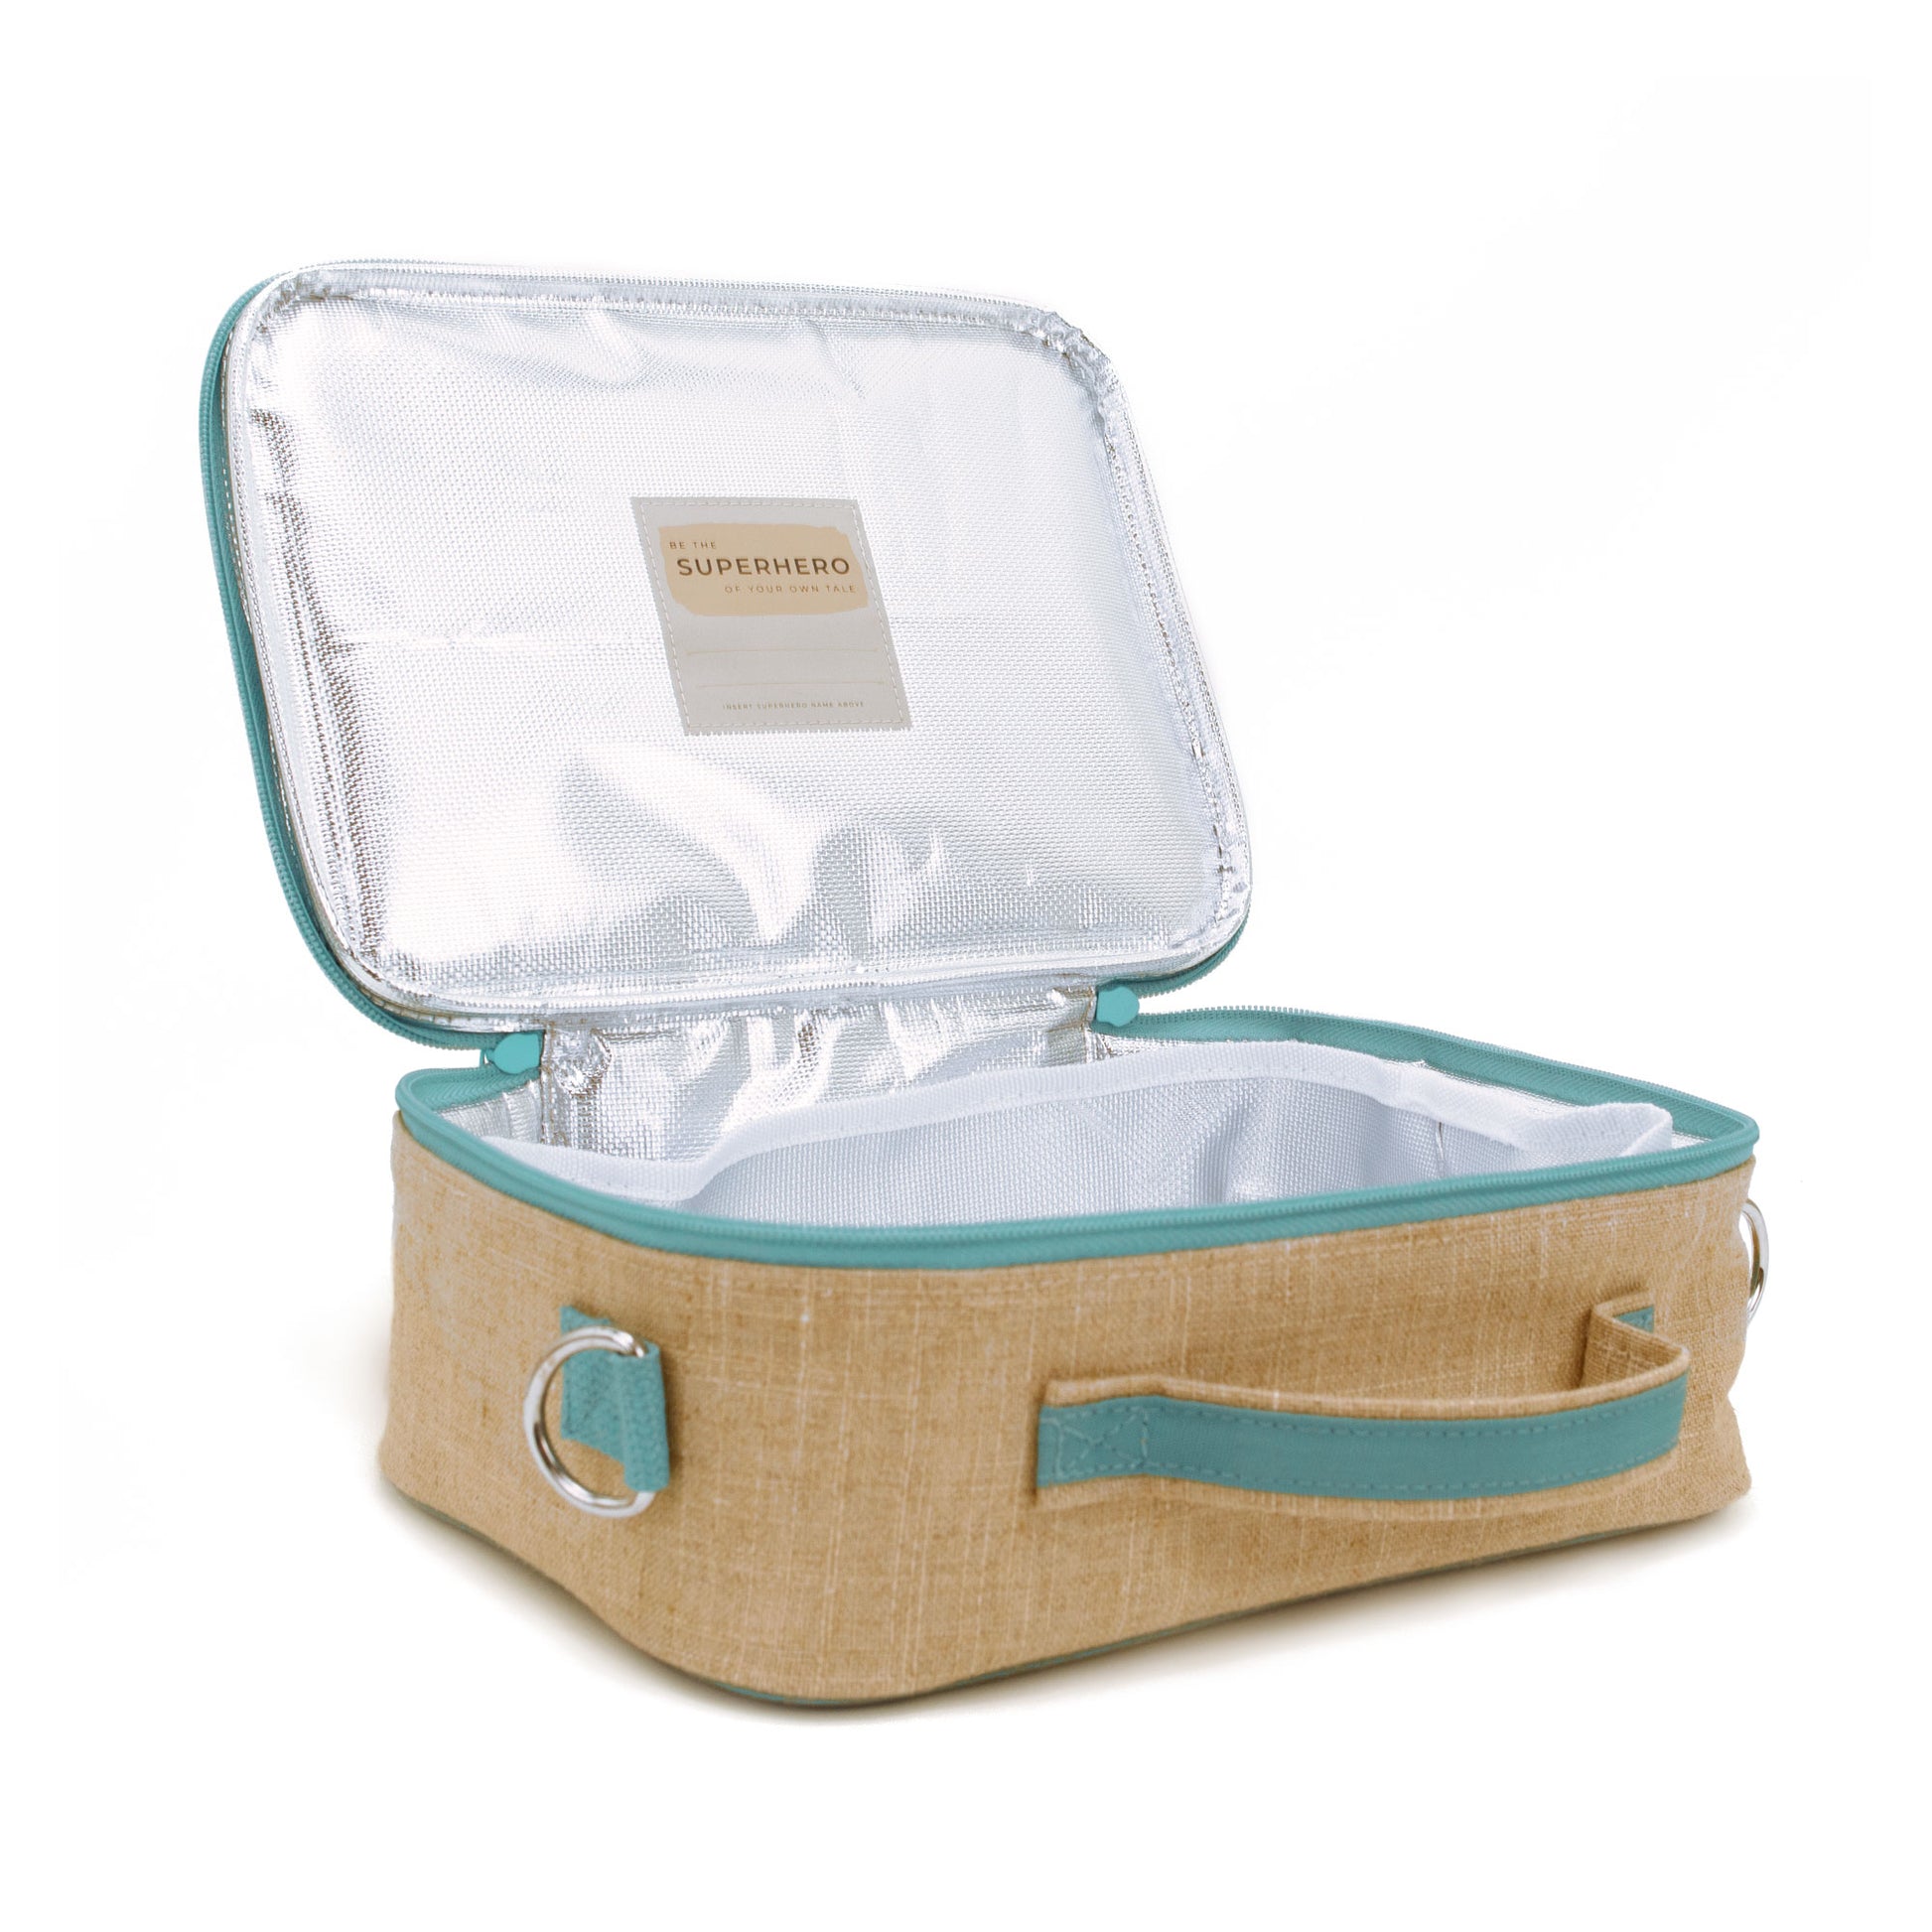 Youth Kids' Lunch Box - Blue